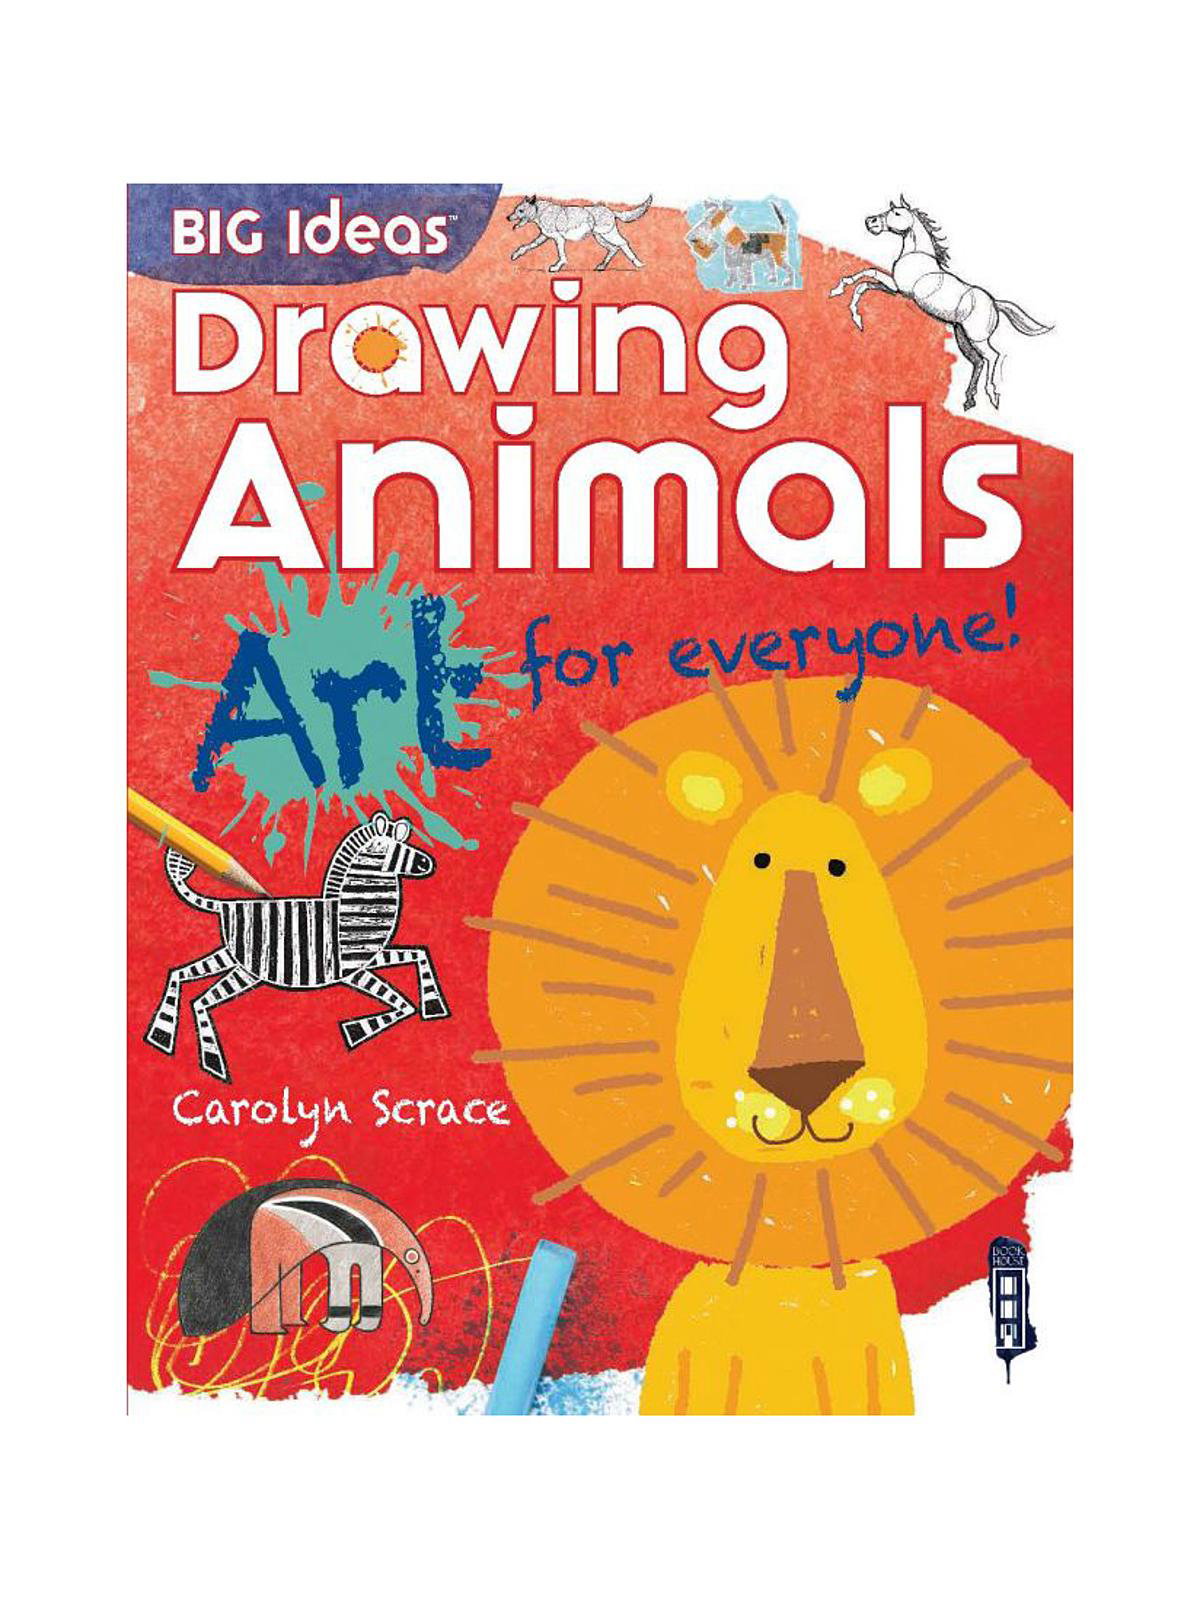 Ed Emberley's Big Red Drawing Book | Mary Pat | Flickr